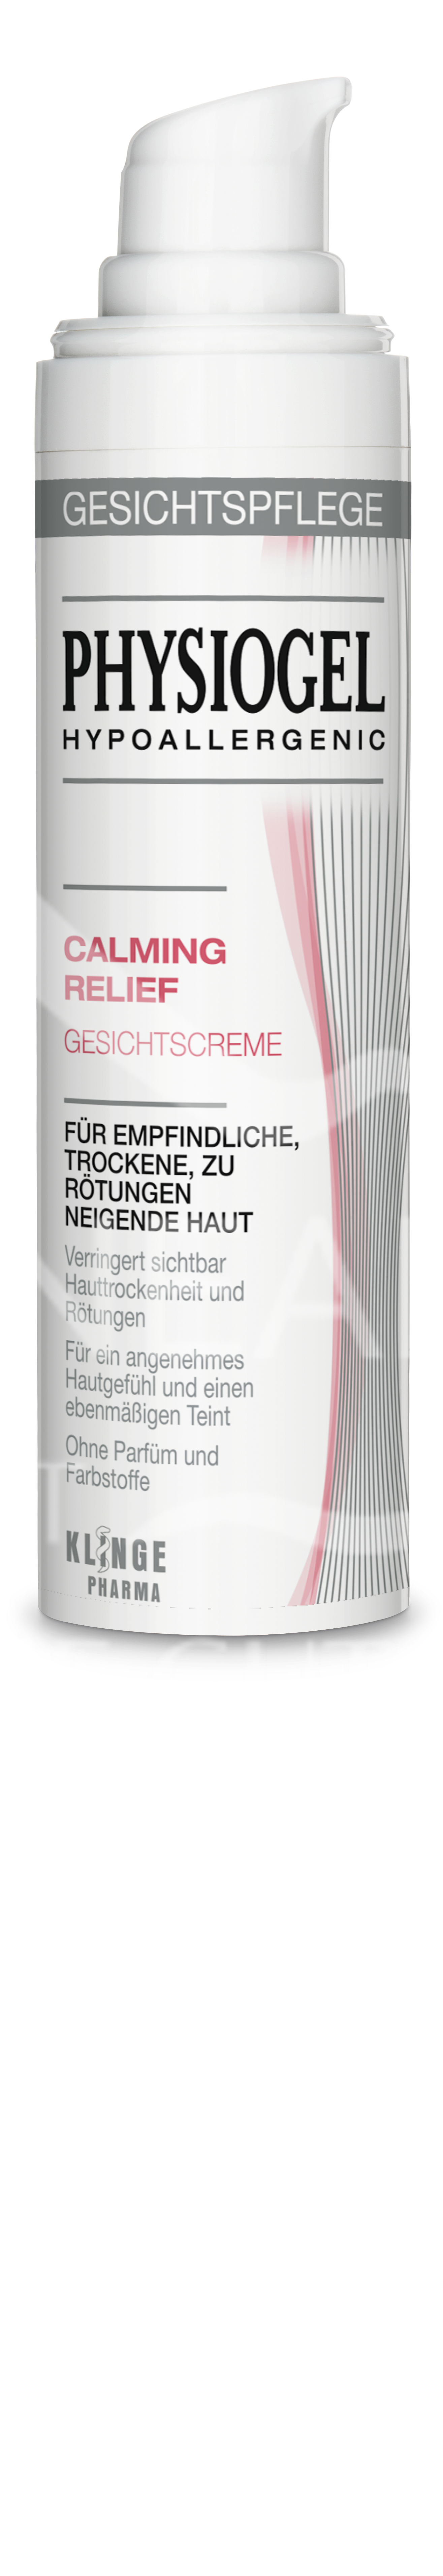 Physiogel® Calming Relief Gesichtscreme